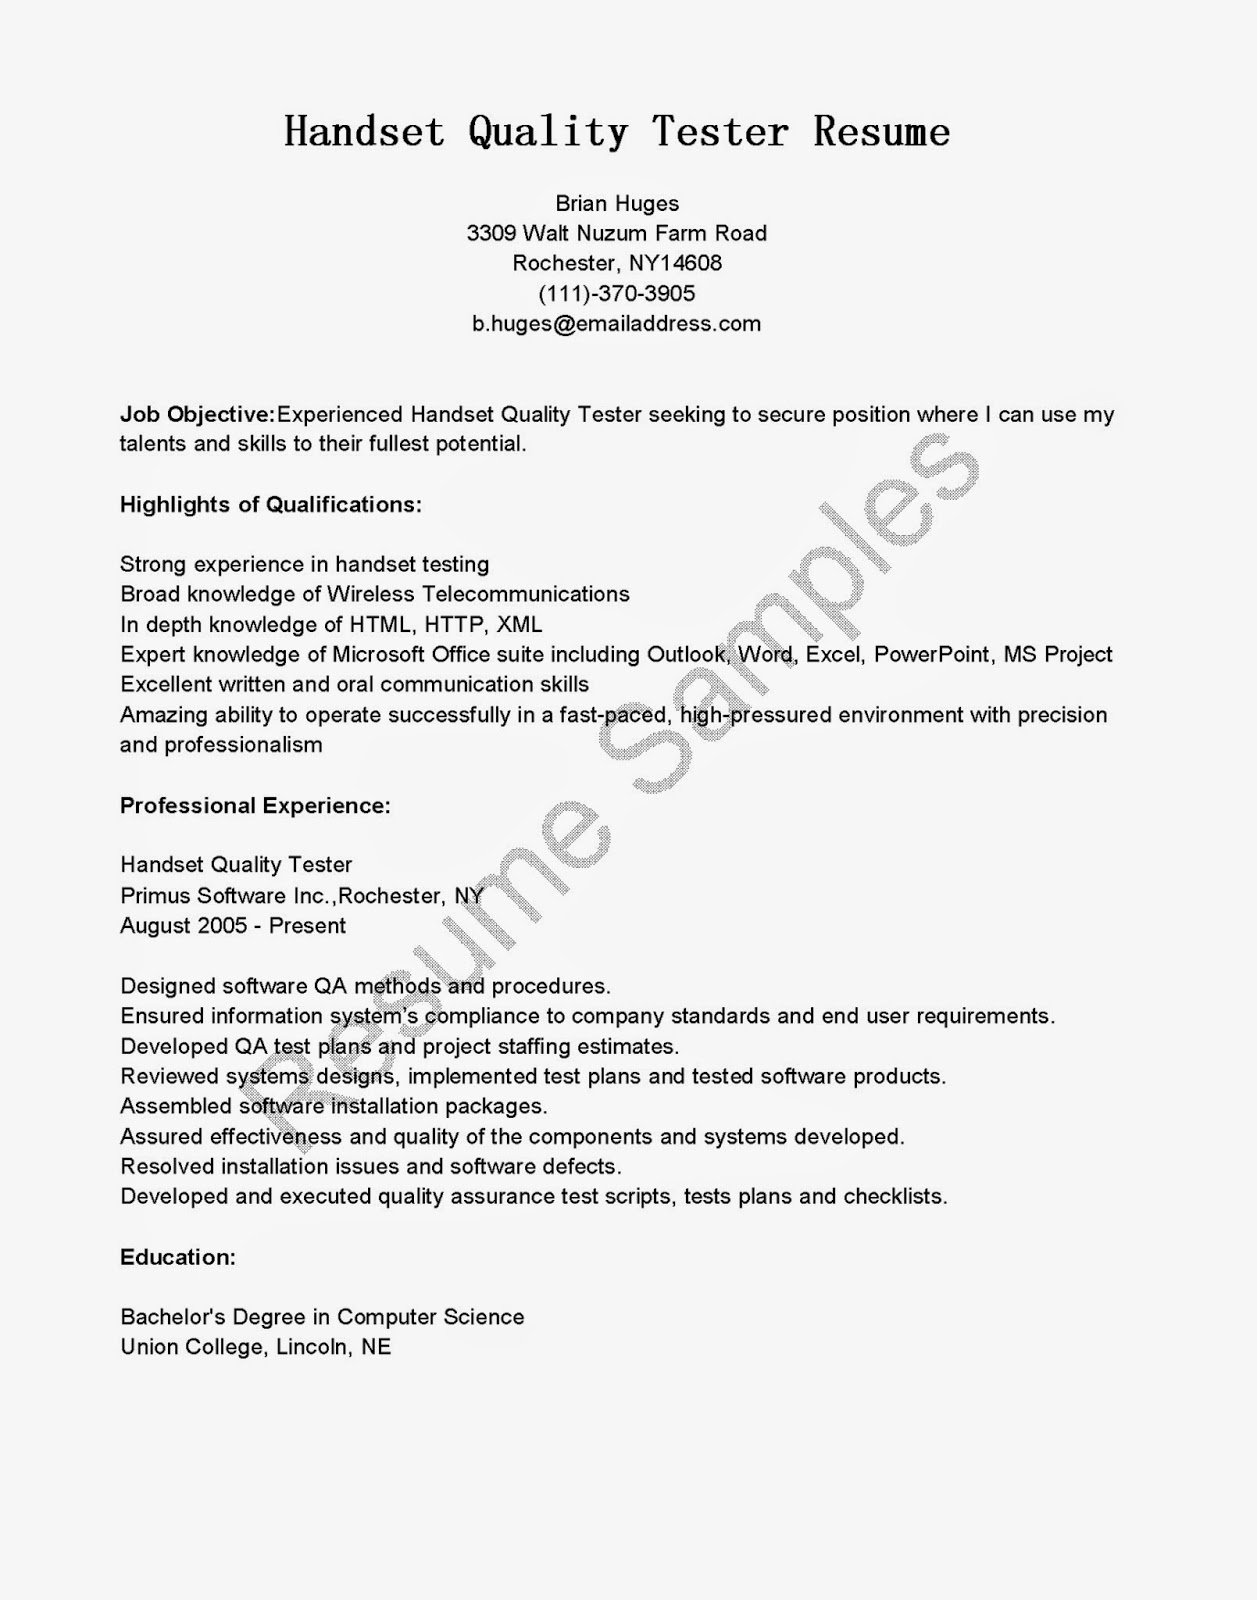 Manager near peoplesoft resume test